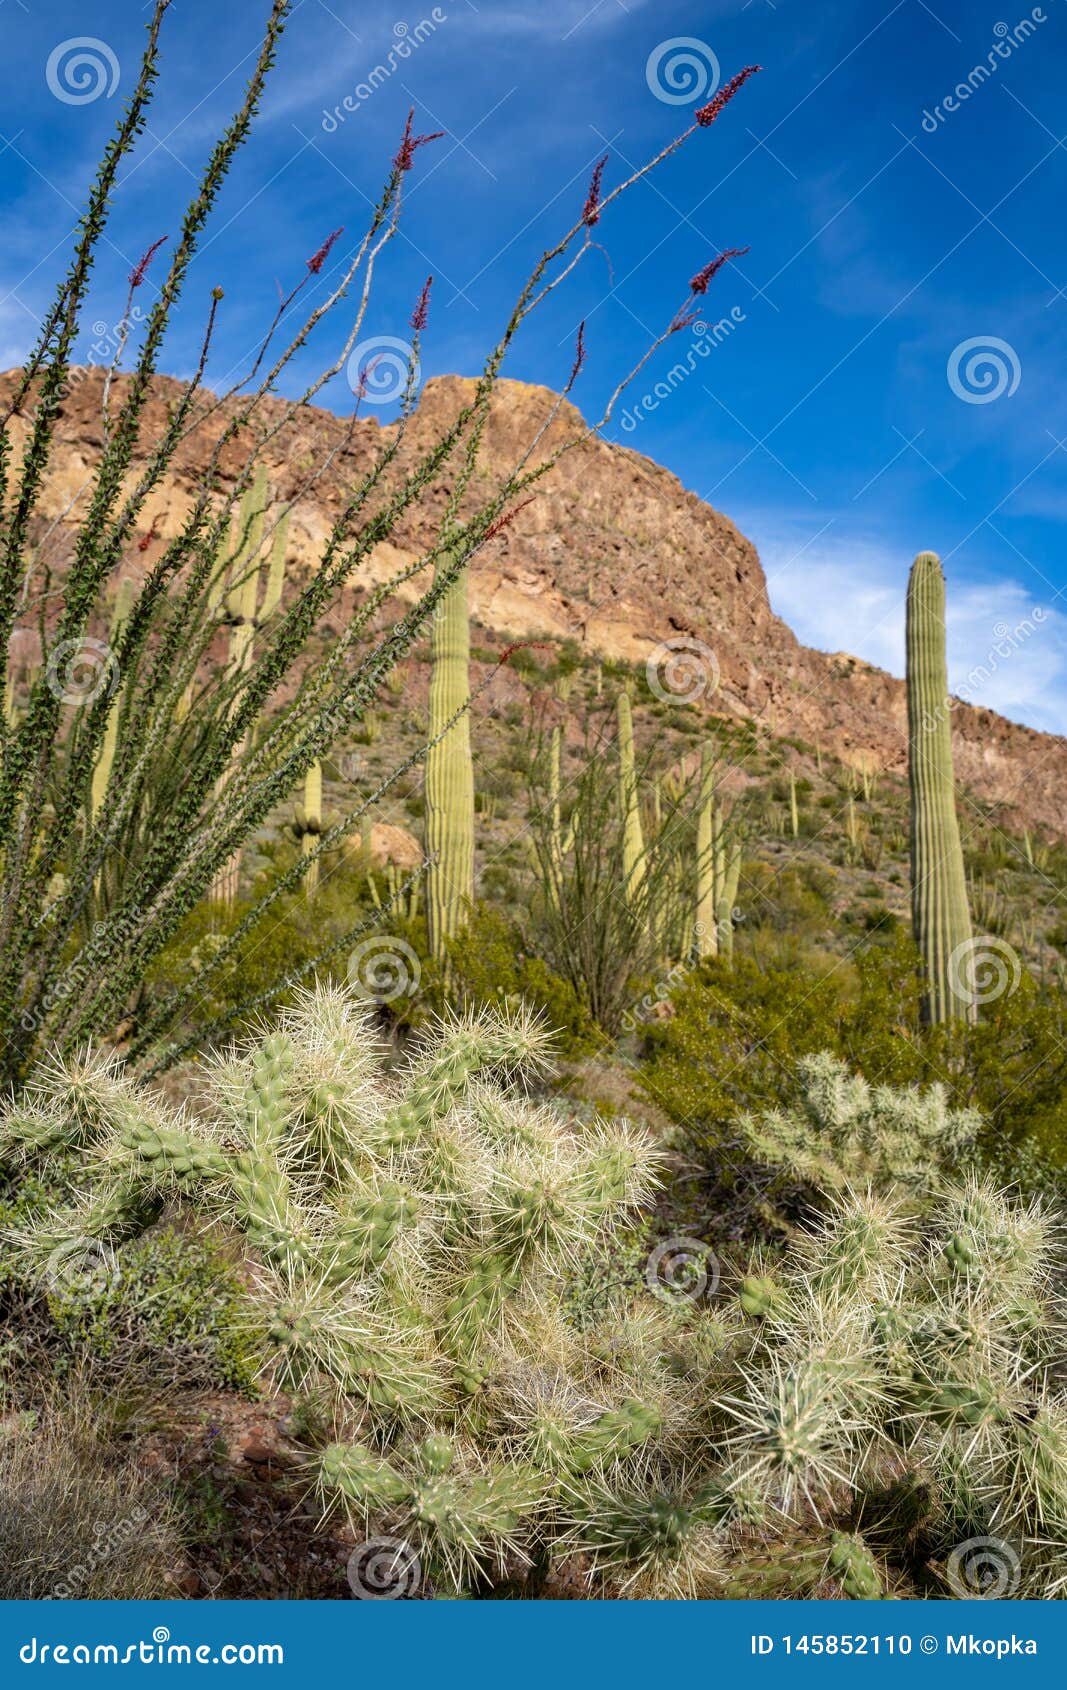 cholla cactus, ocotillo plants and saguaro cactus grow together along ajo mountain drive in arizona in organ pipe national